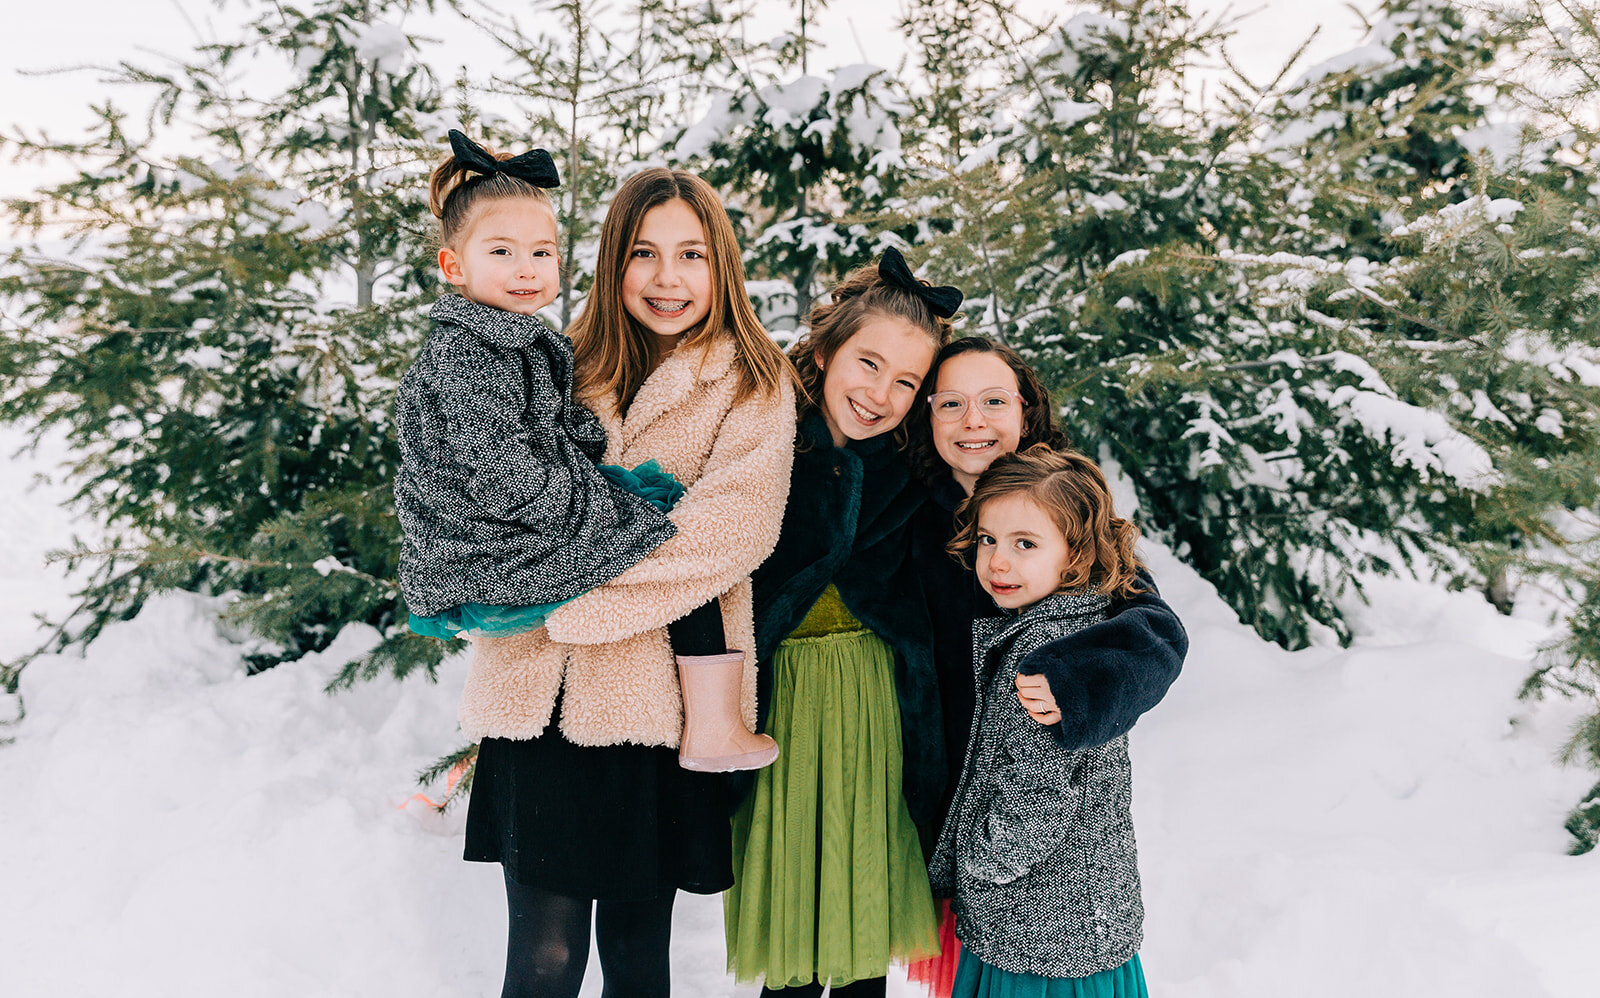  sisters hugging and smiling five daughters family pictures daughters kid fashion family picture styling inspiration family pose ideas winter photoshoot snowy pictures adams acres tree farm family photographers in utah professional family photographe